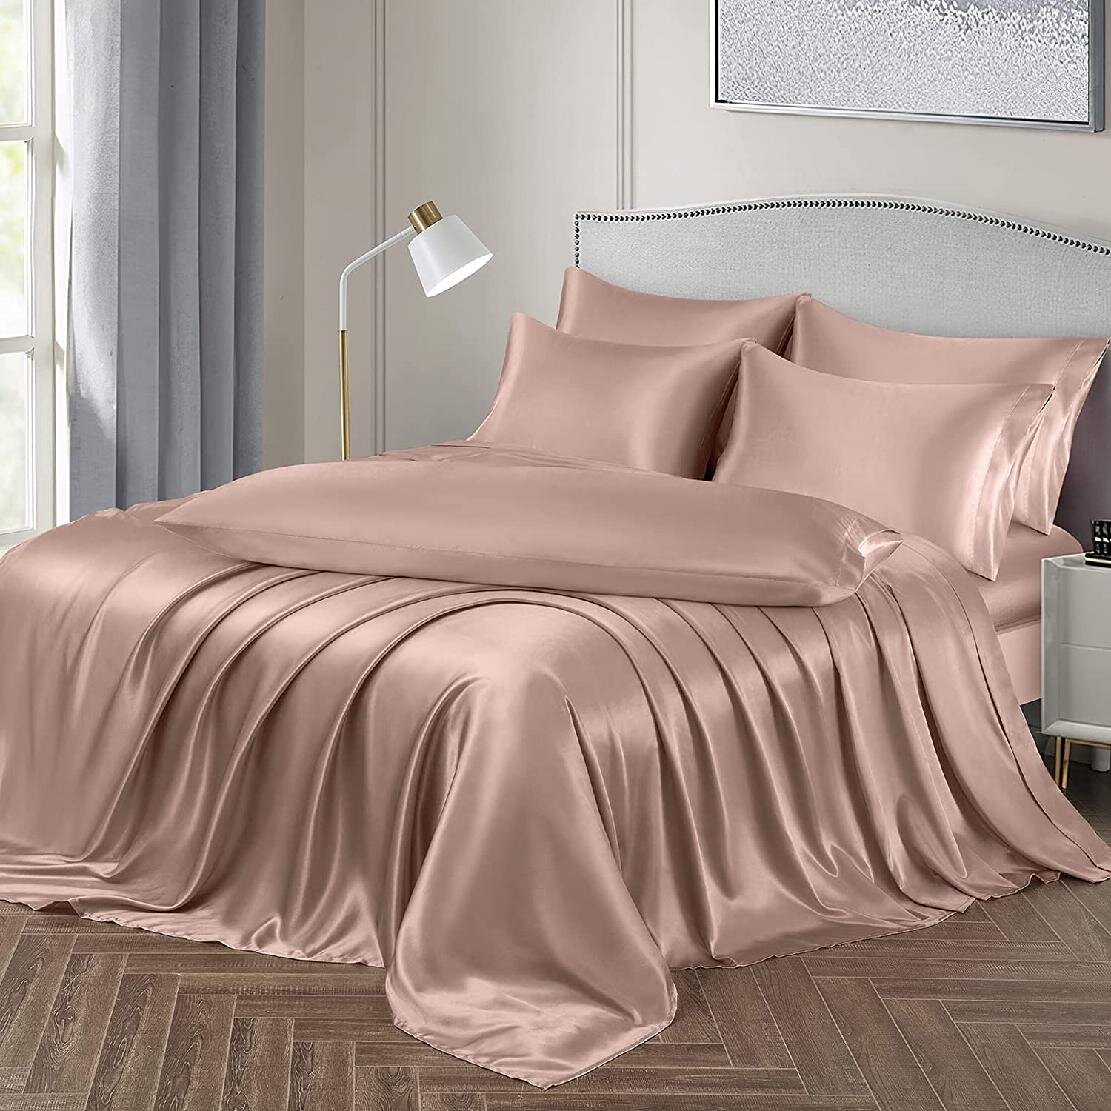 6 Pieces Silk Bed Sheet Set Luxury Rich Satin Black Smooth and Silky with Deep